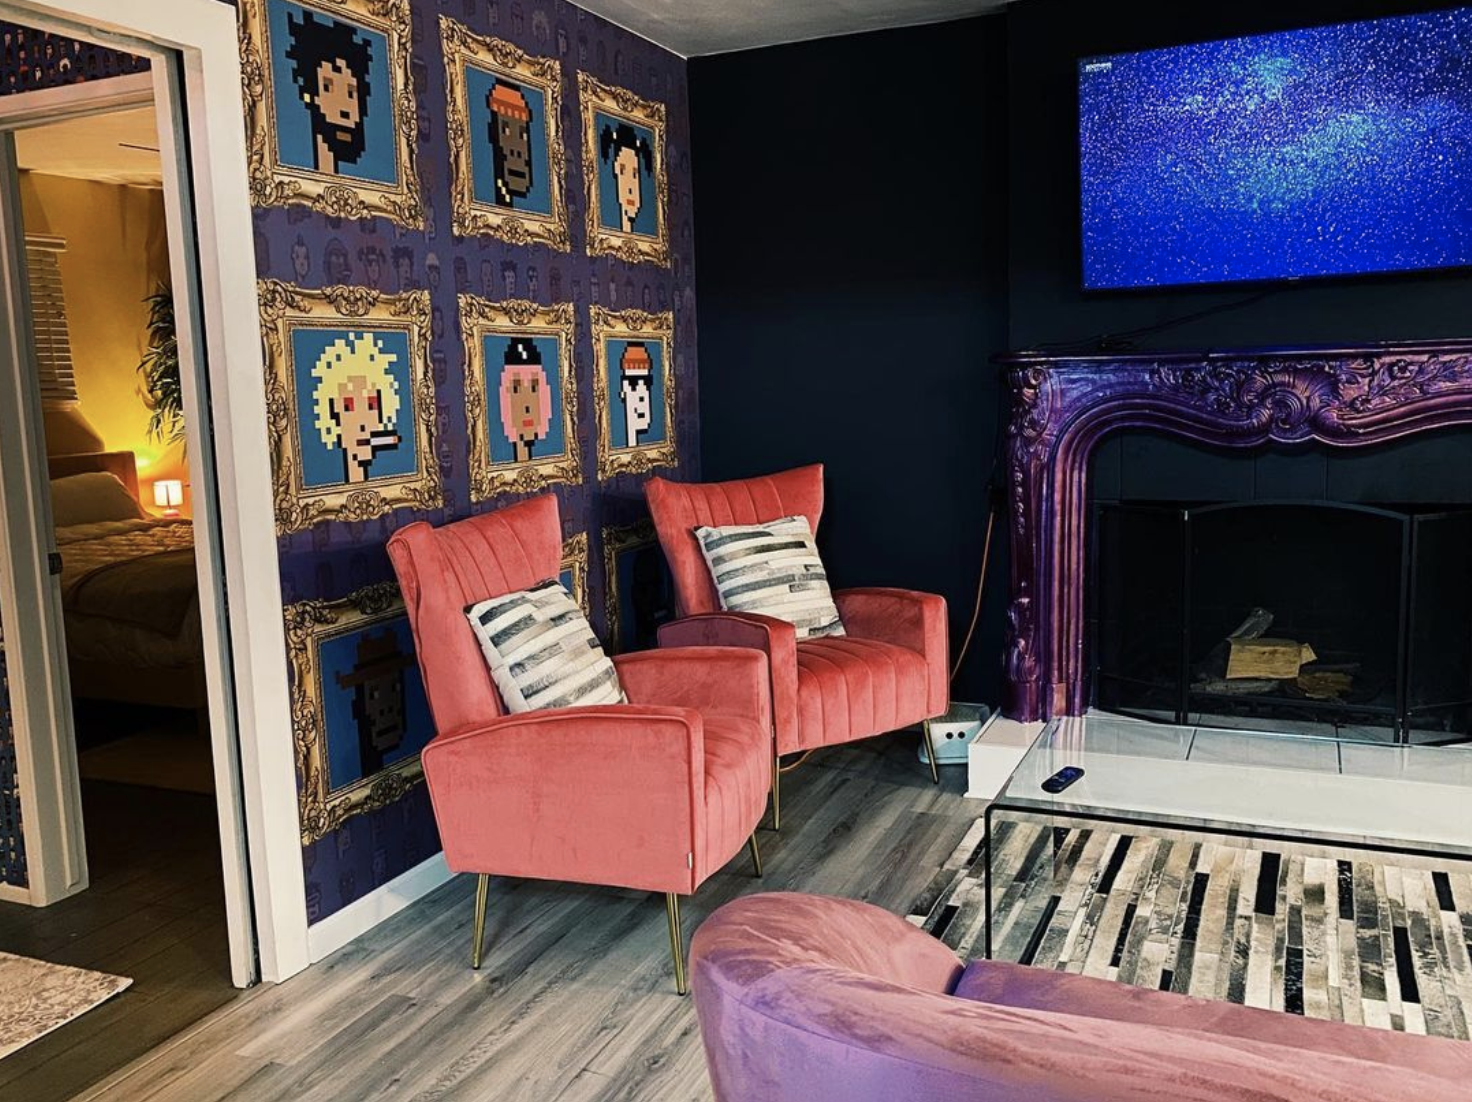 The living room of the Crypto House, which has hot pink armchairs and a shiny purple fireplace